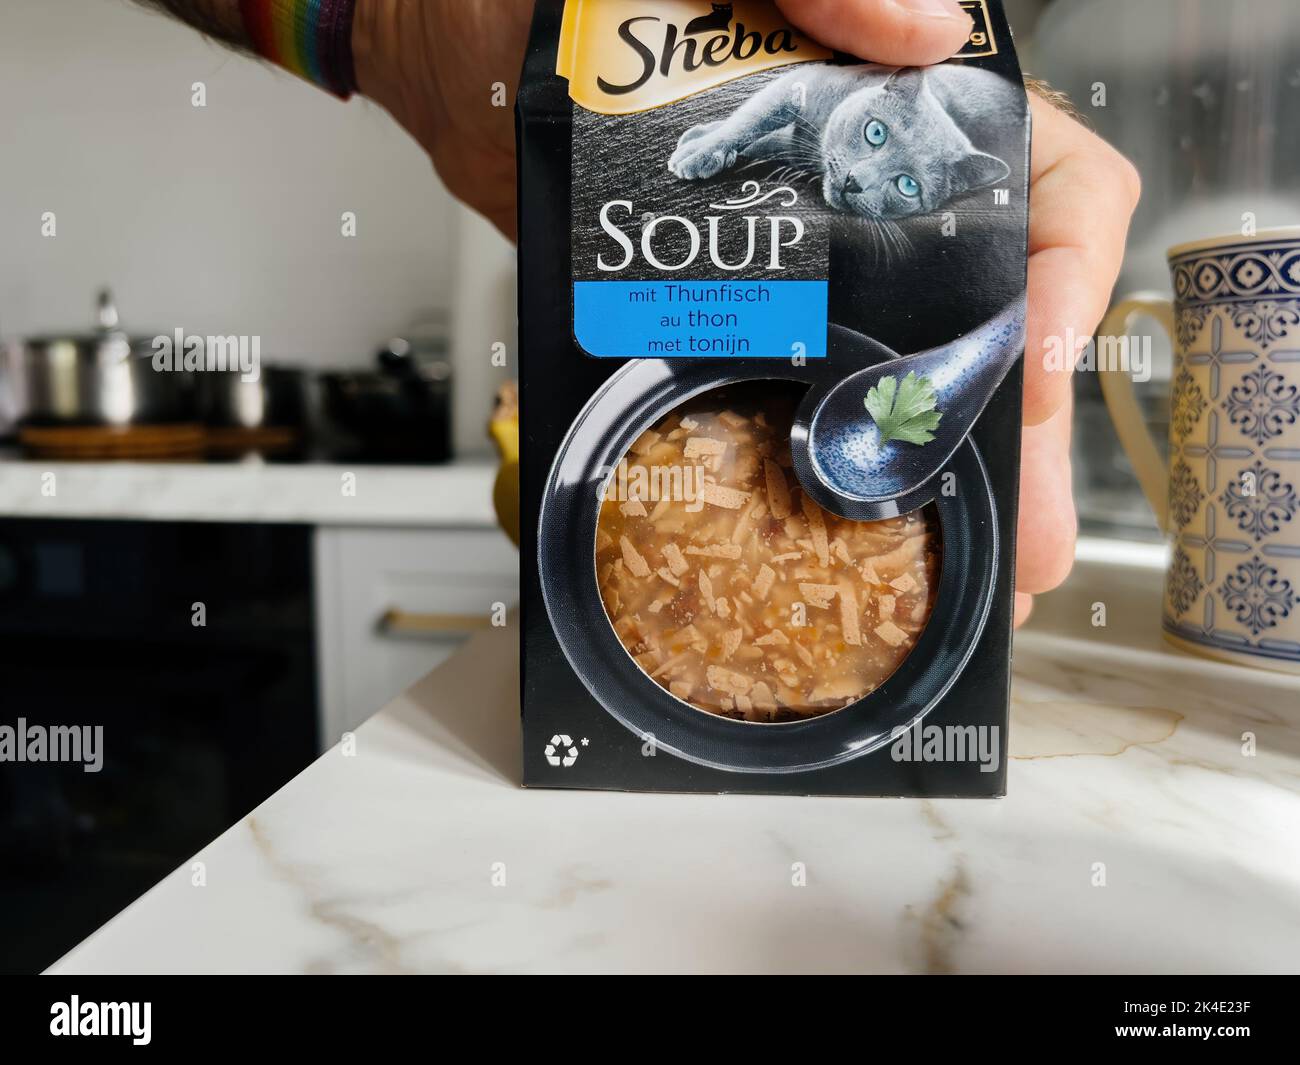 Paris, France - Sep 13, 2022: POV male hand holding carton package with Sheba Soup with tuna fish - modern kitchen background preparing to feed the pet cat animal Stock Photo